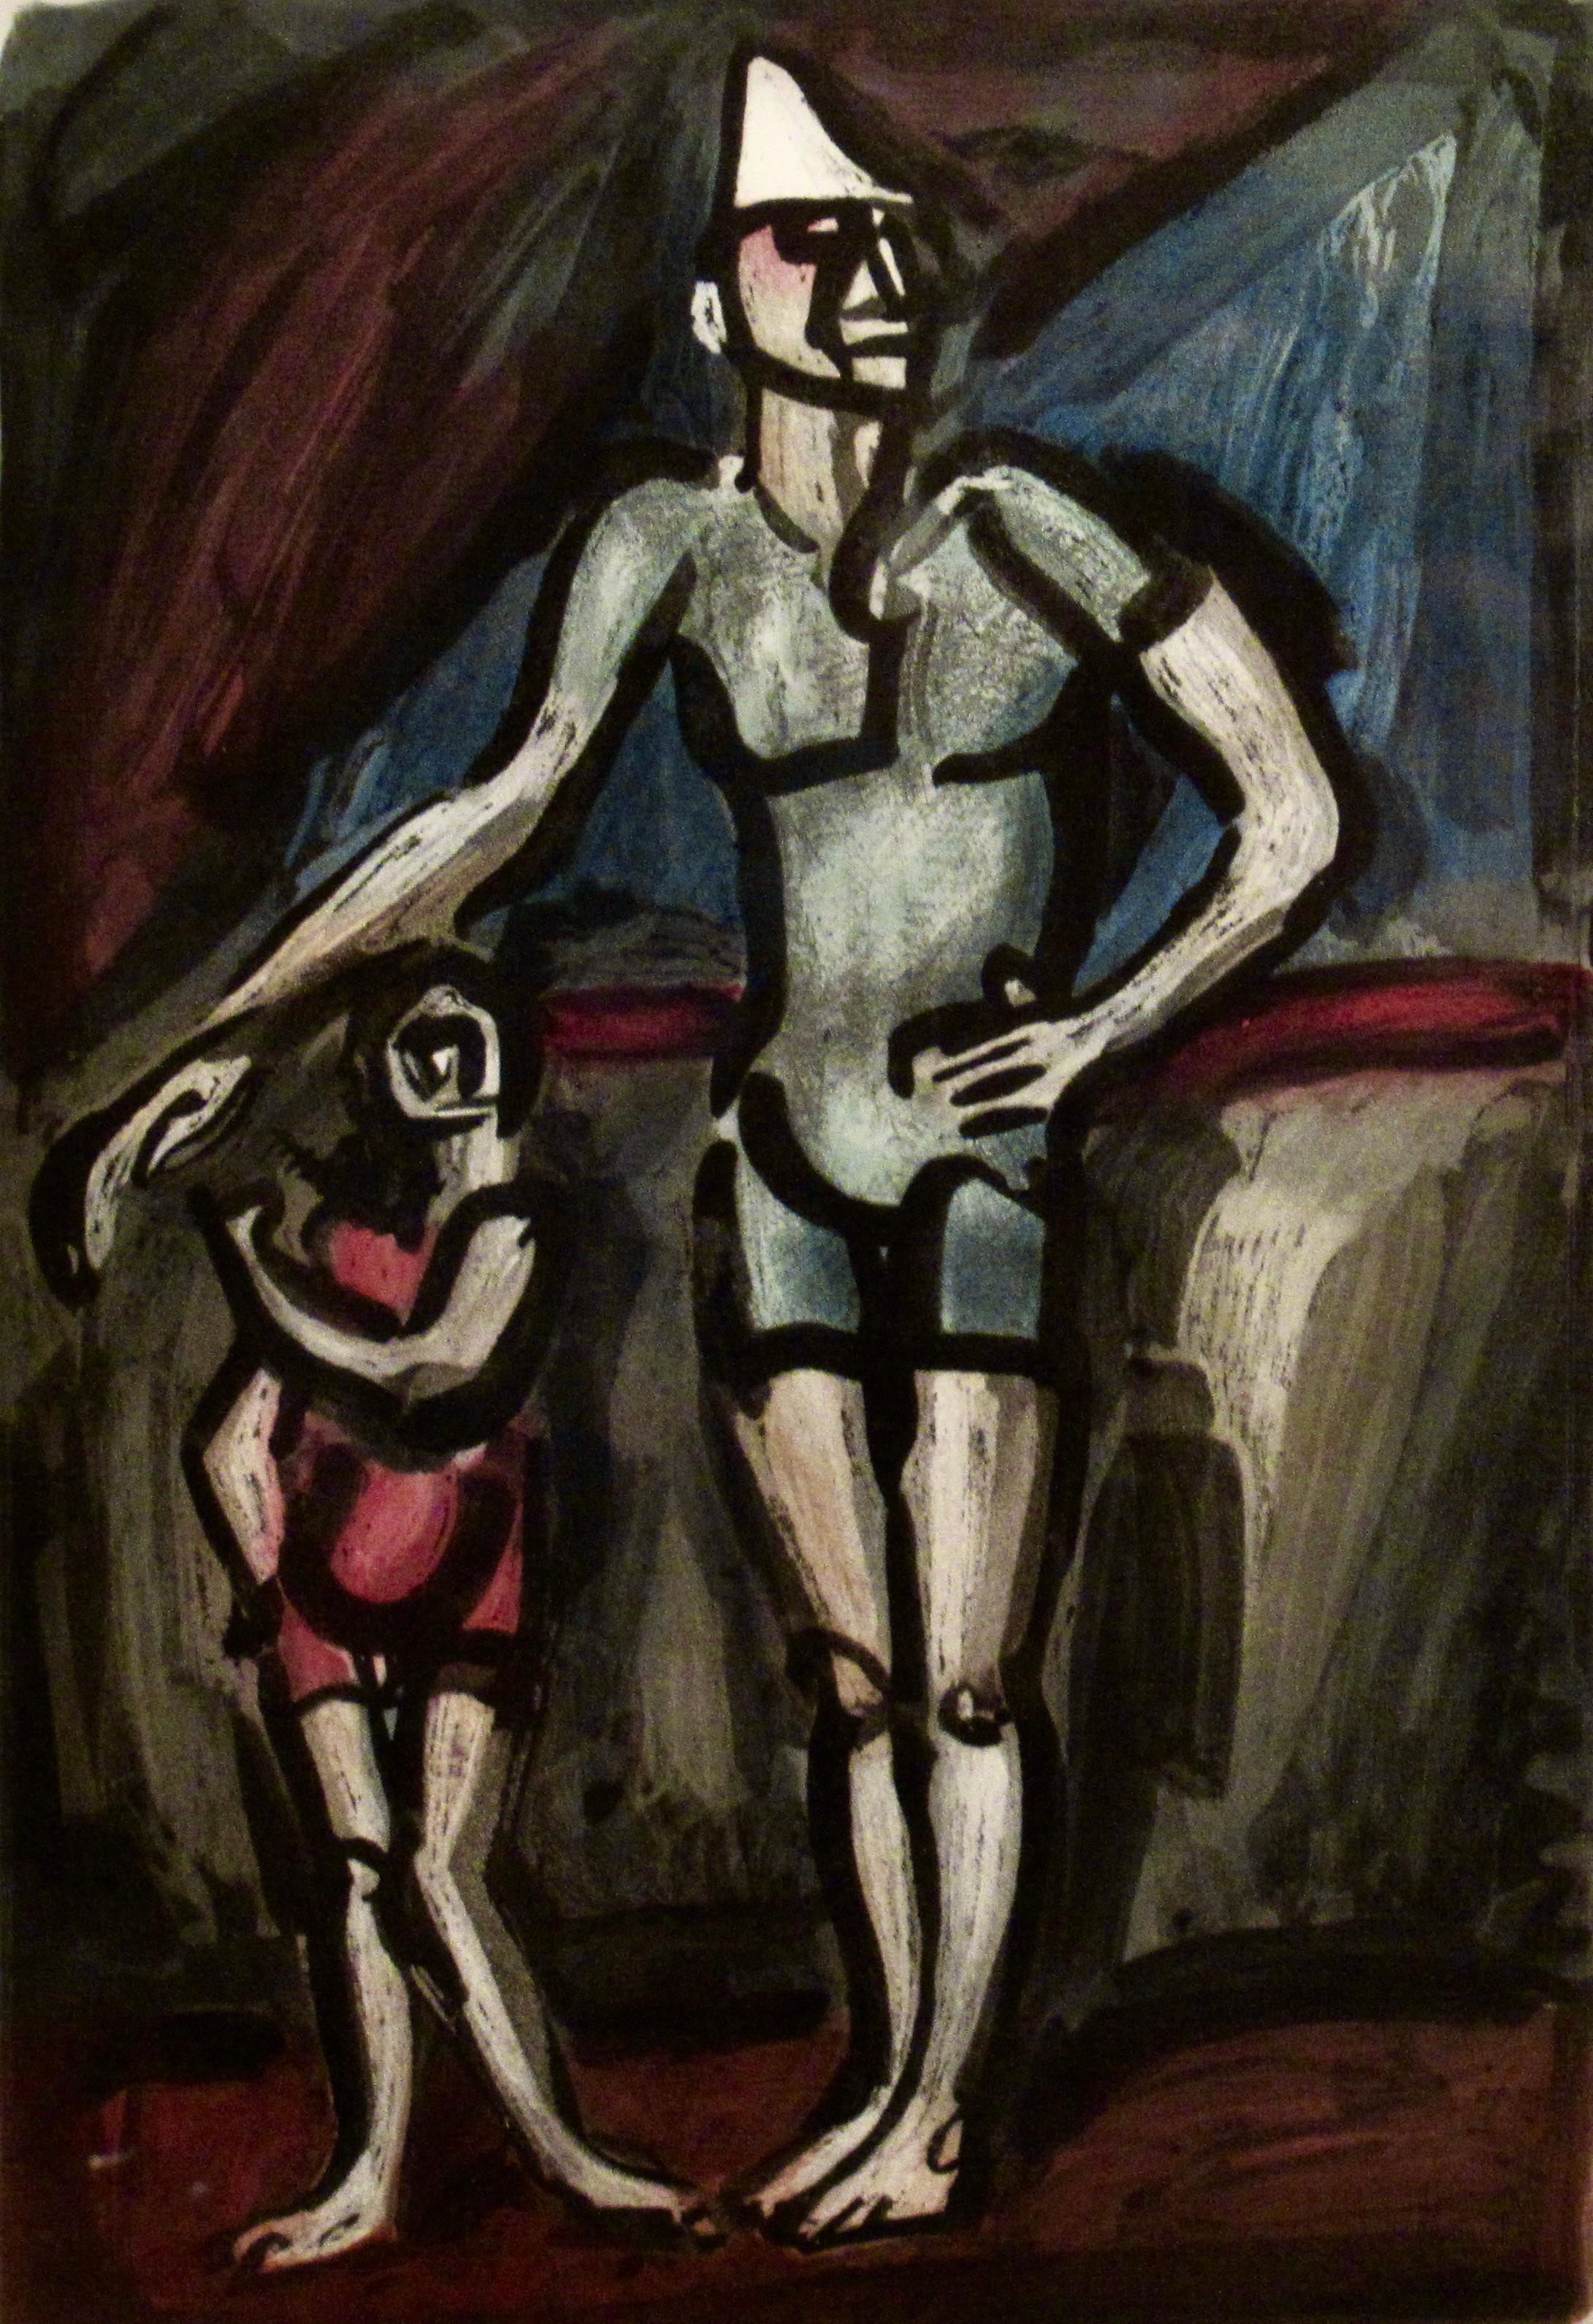 Clown et Enfant (Clown and Child) From the suite Cirque (Circus) - Expressionist Print by Georges Rouault